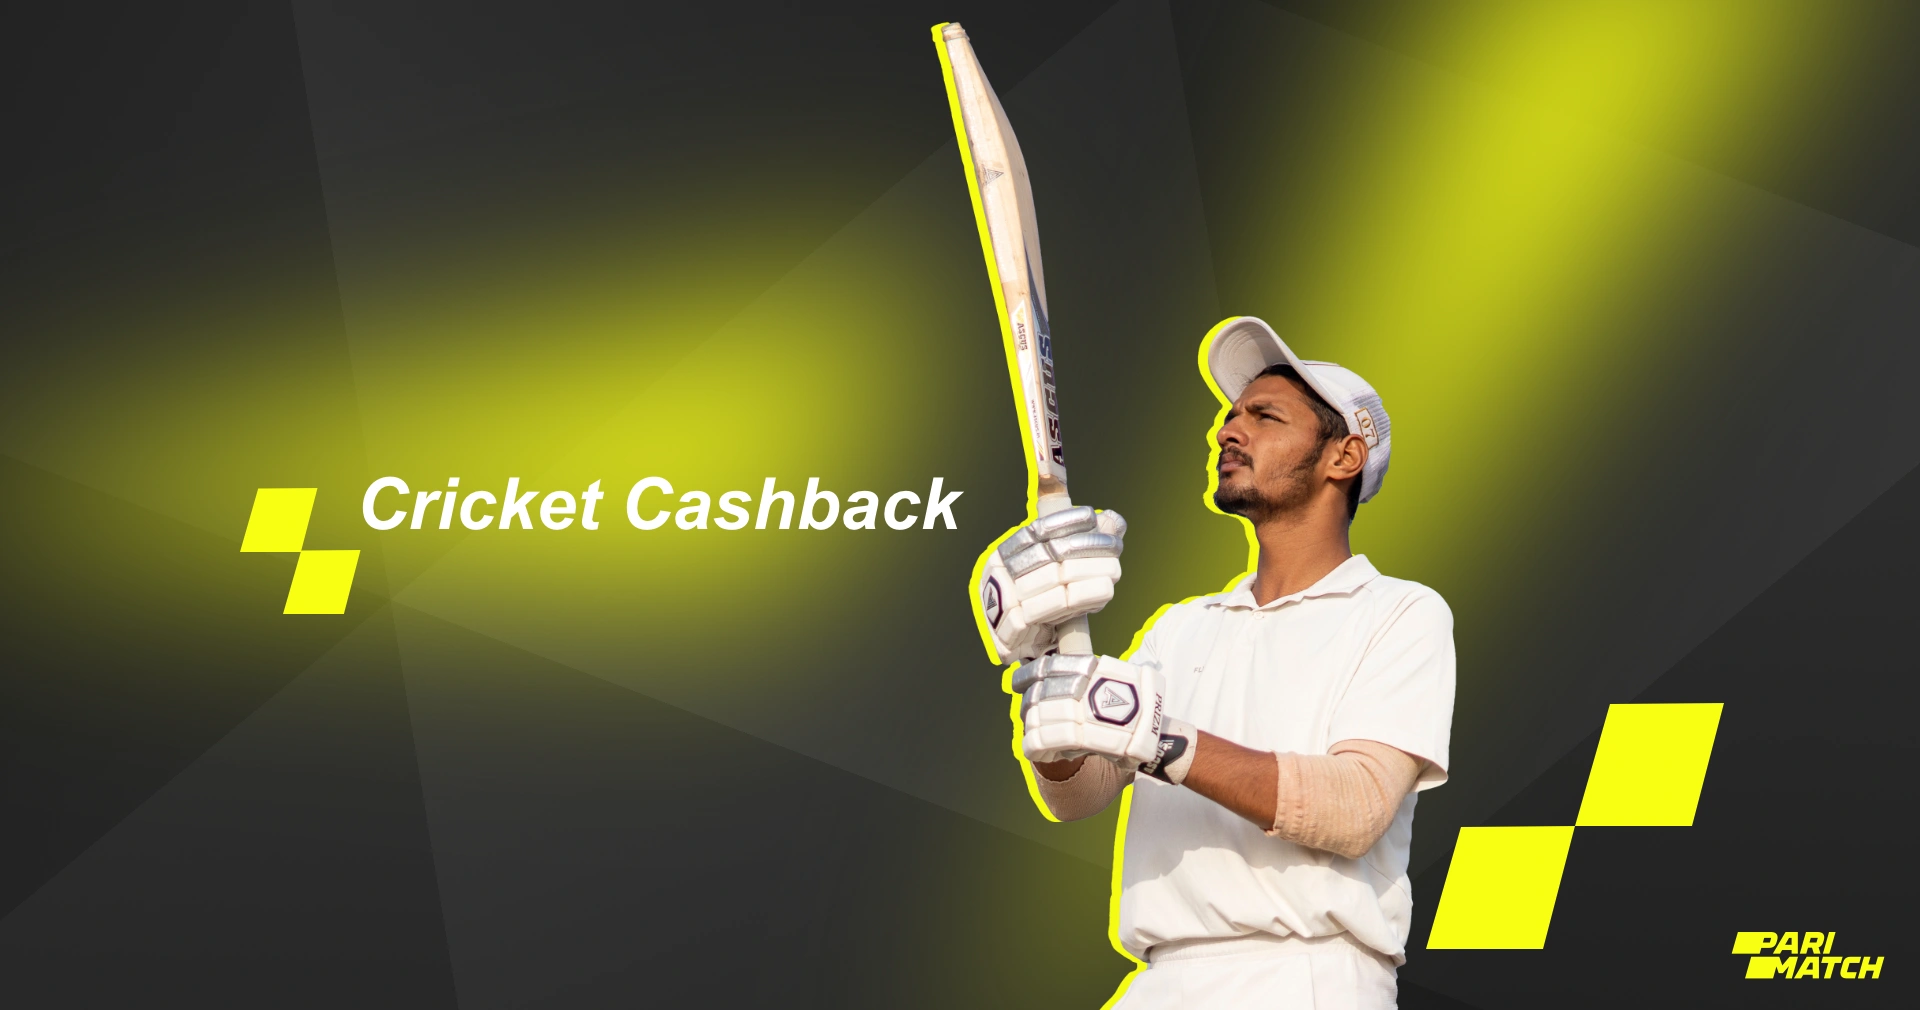 By betting on cricket you can get cashback from Parimatch